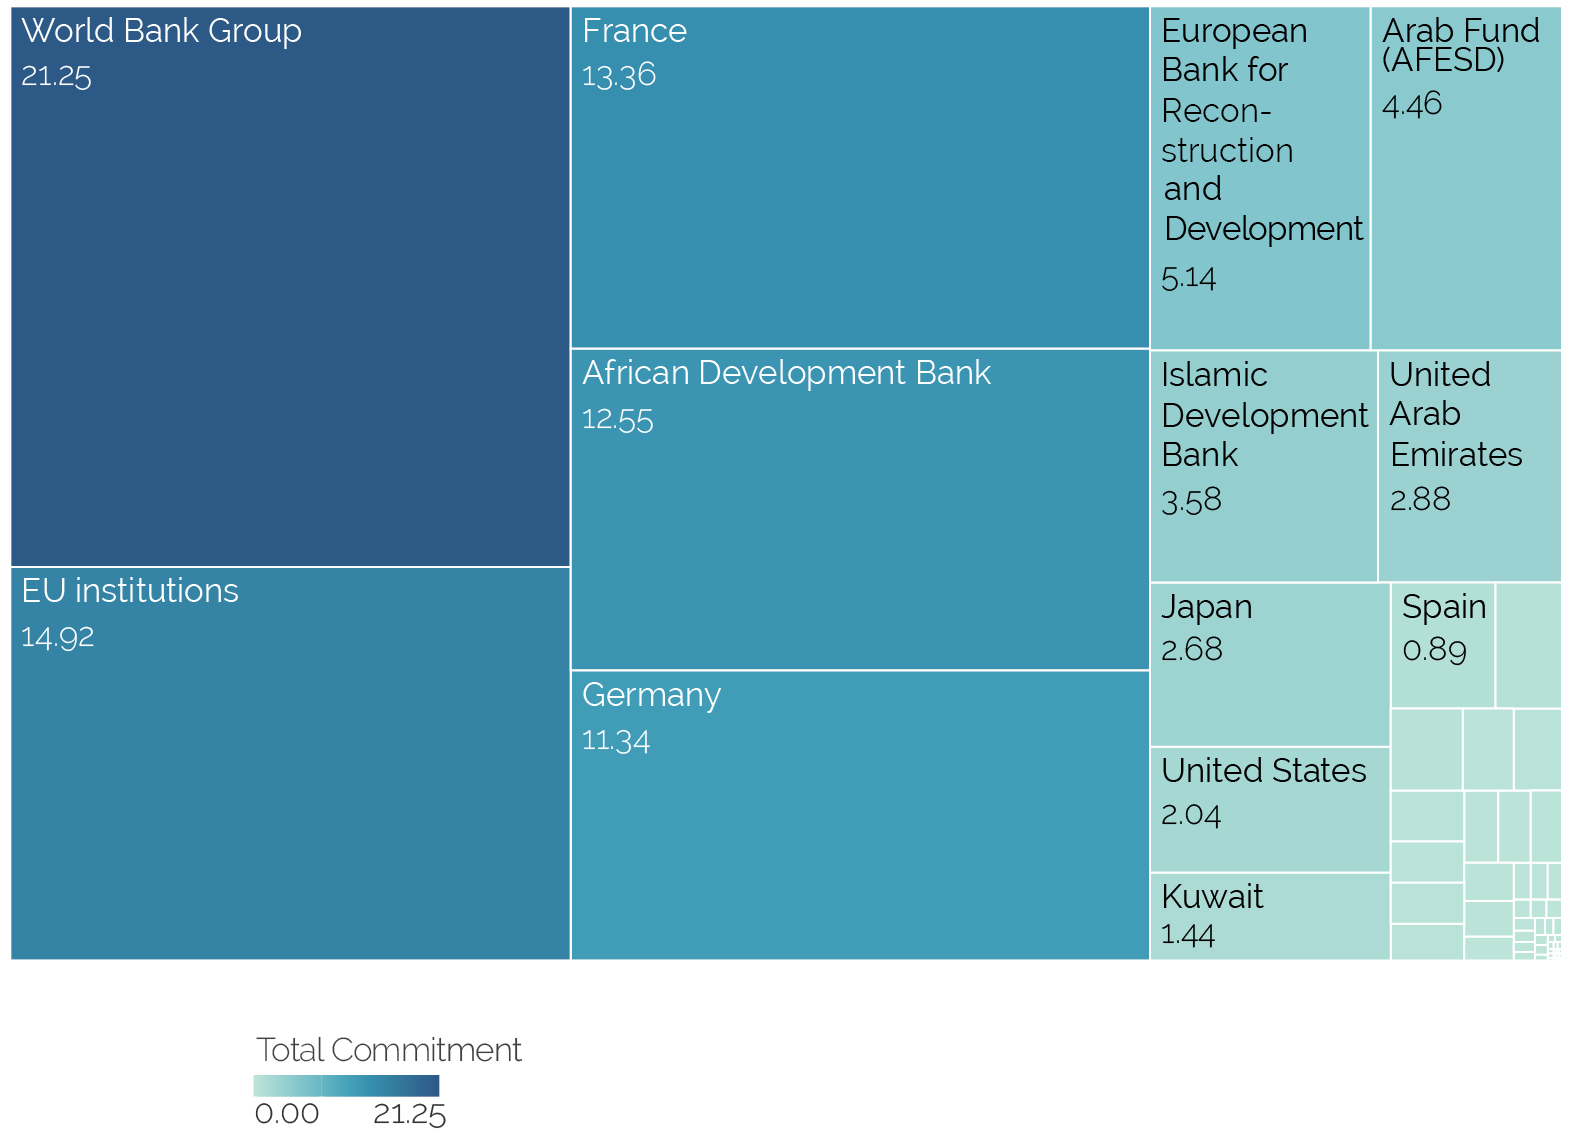 Tree diagram showing that the Bank Group has been Morocco’s lead development partner regarding overall commitment amounts.